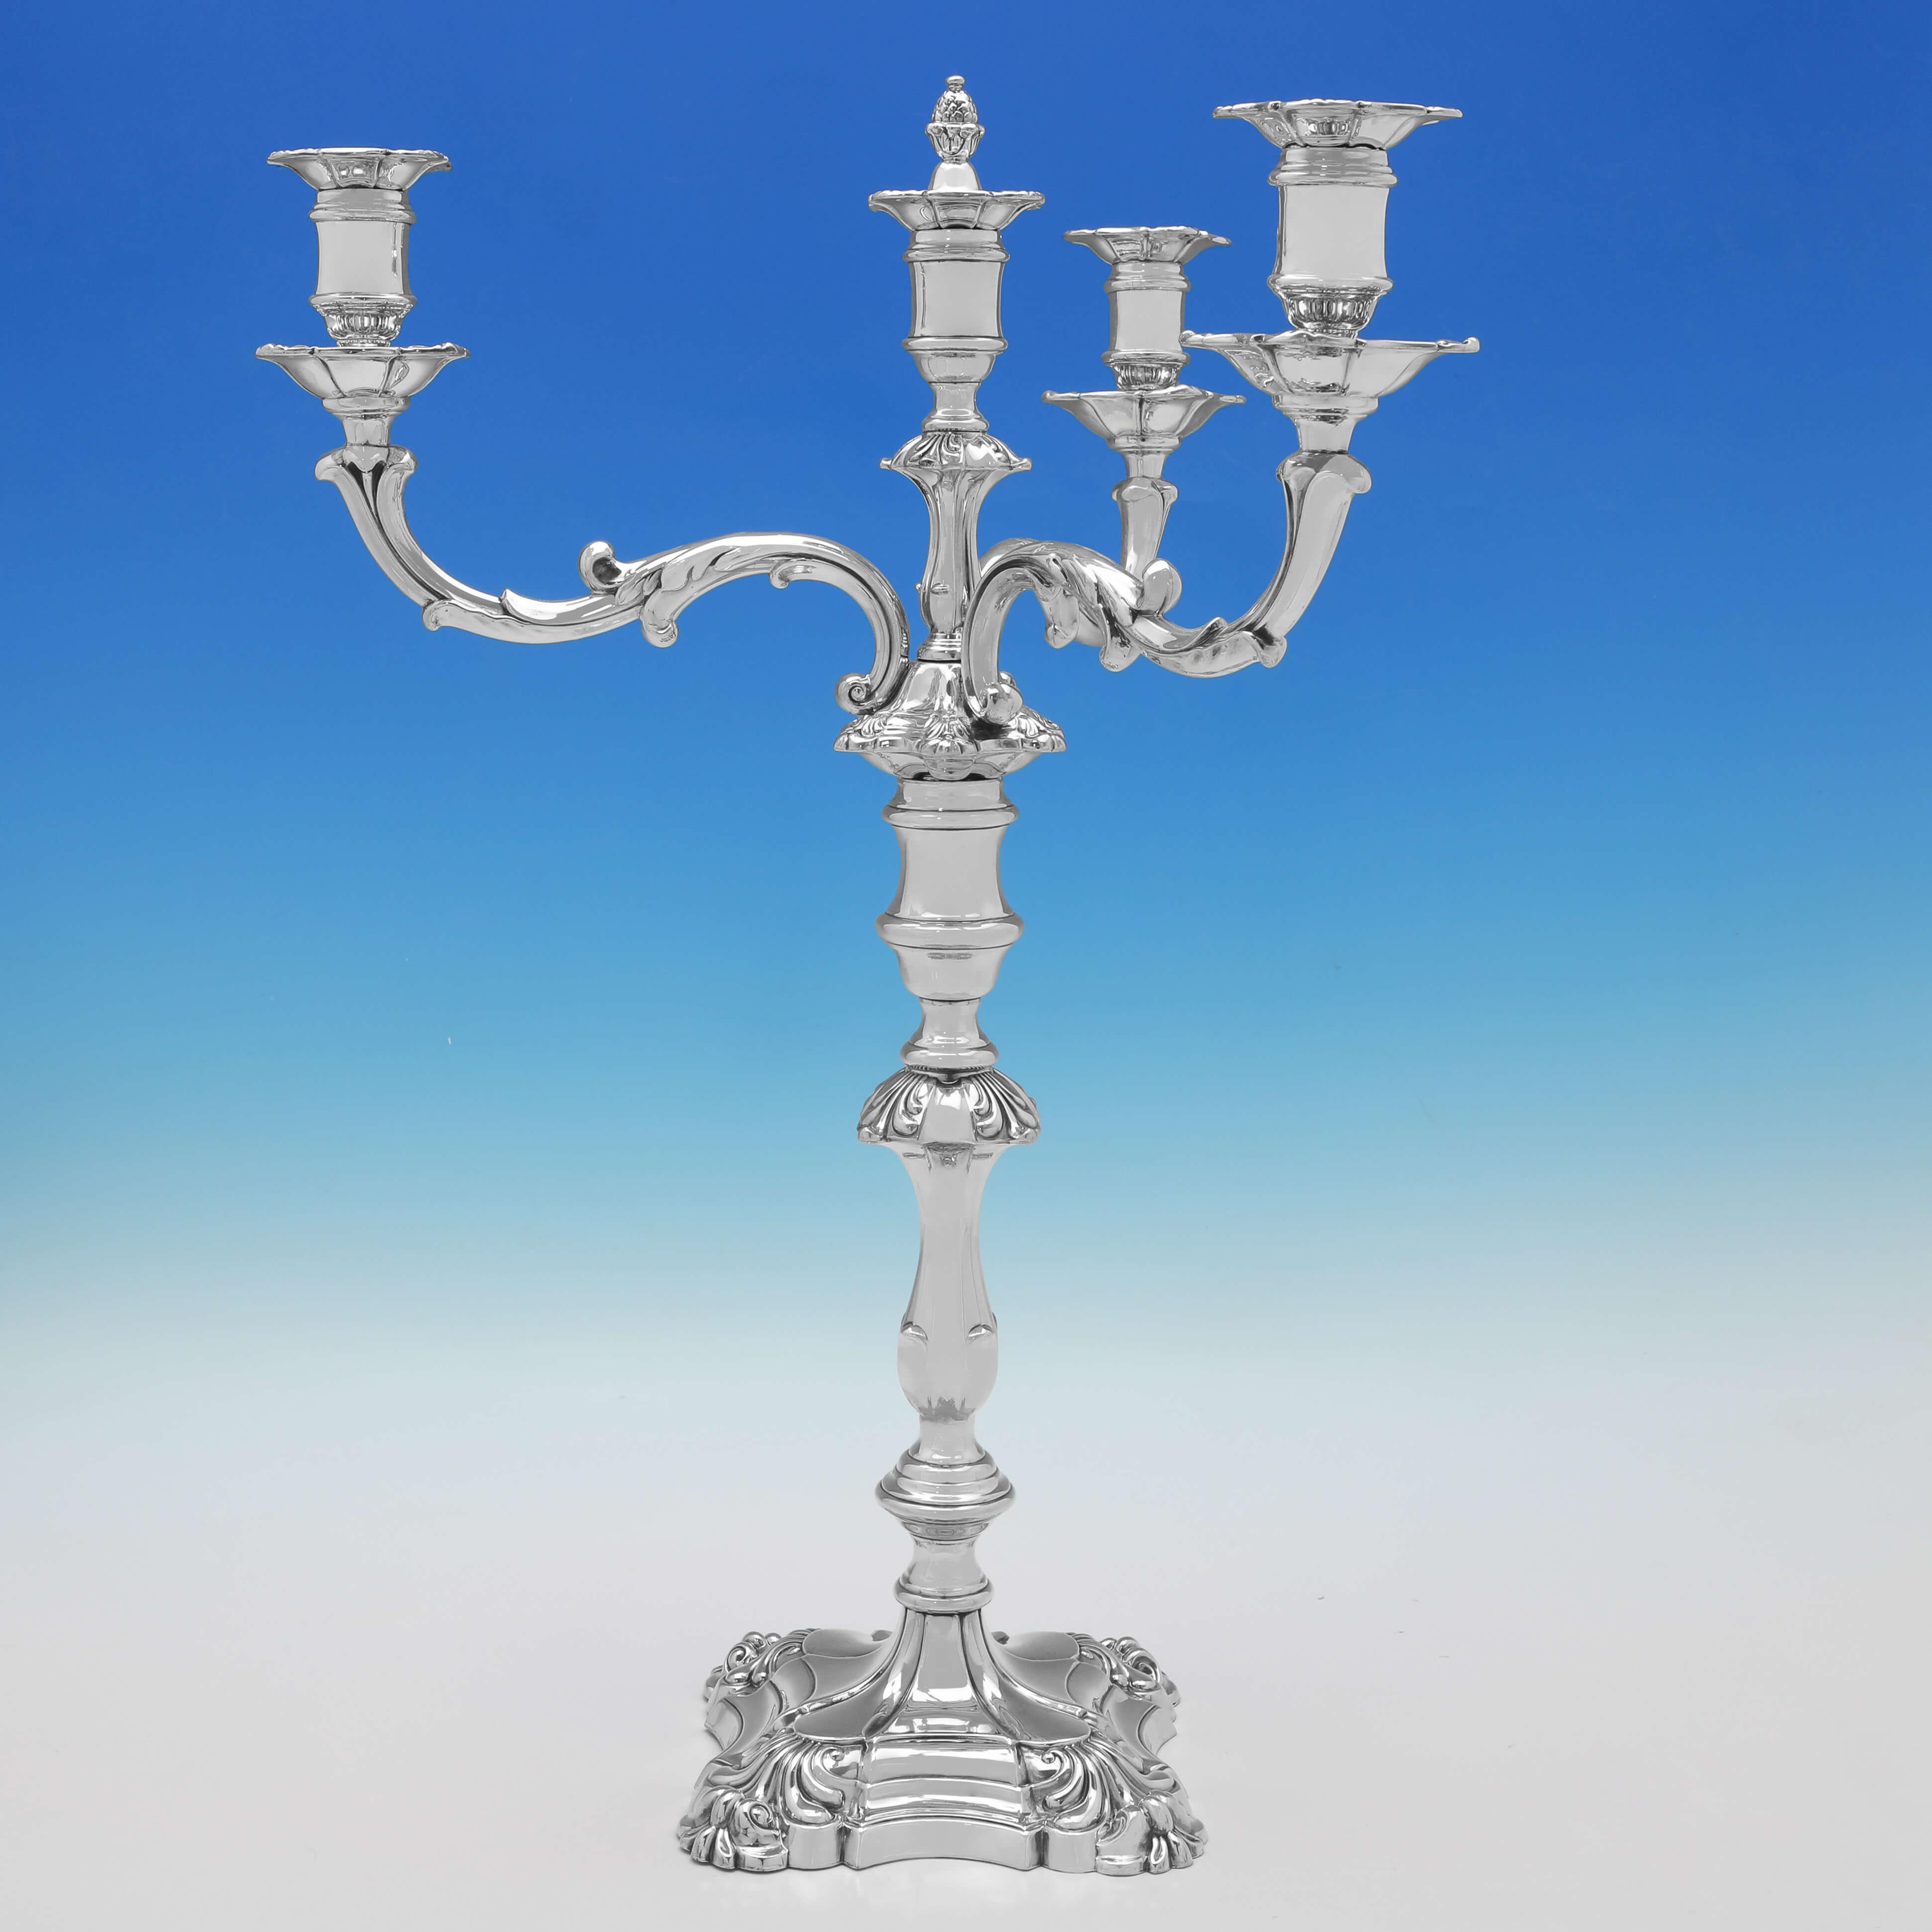 Hallmarked in Sheffield in 1844 & 1845 by Walter Knowle & Co., this stylish, and large pair of Antique Sterling Silver Candelabra, are in the '4 shell' style, and will hold 4 candles each. 

Each candelabrum measures 22